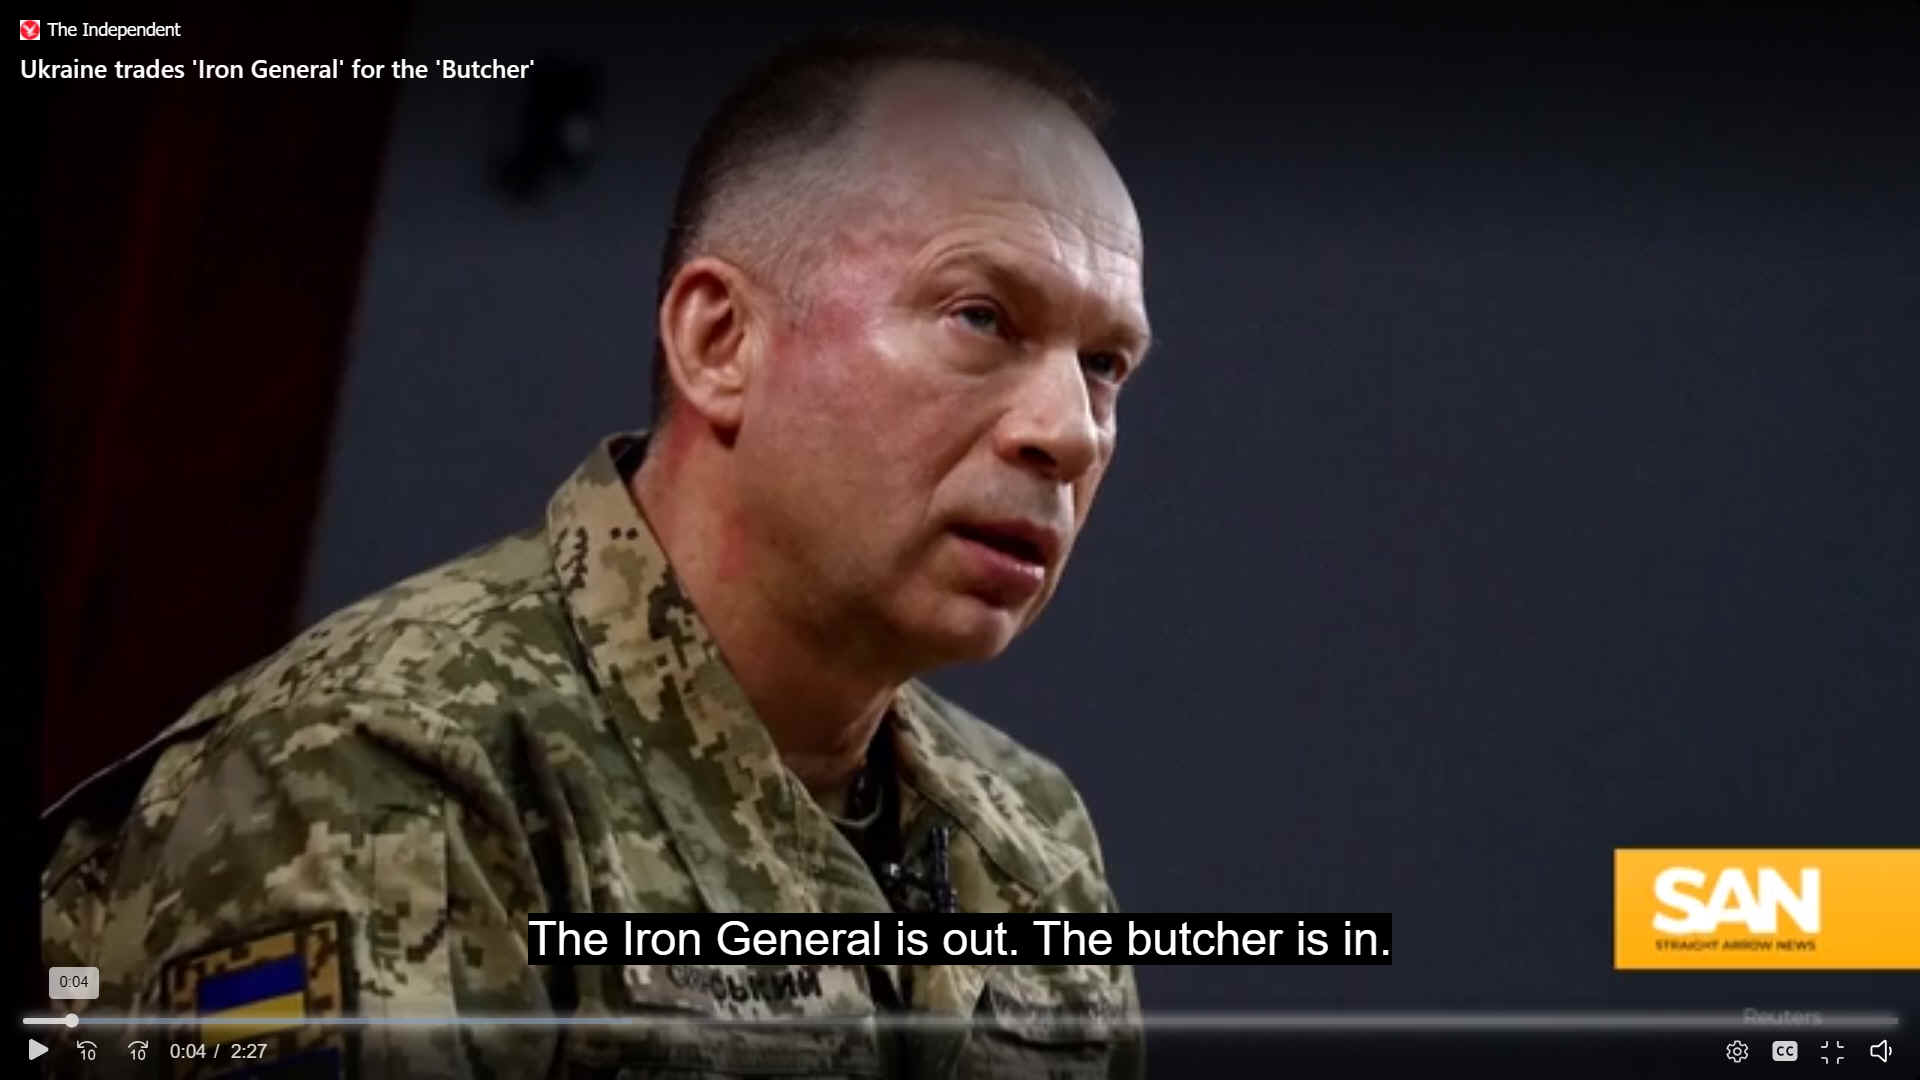 Ukraine's Iron General is replaced by the Butcher. General Oleksndr Syrskyi. To prevent Russia from gaining supremacy on the battlefield, NATO must share with Kyiv its most up-to-date training and warfighting lessons to make Ukrainian soldiers fit to counter the Russian military, Maj Gen Ryan believes. For sure Russia will take advantage inn the void in military aid. They are the chess masters of exploiting weaknesses.